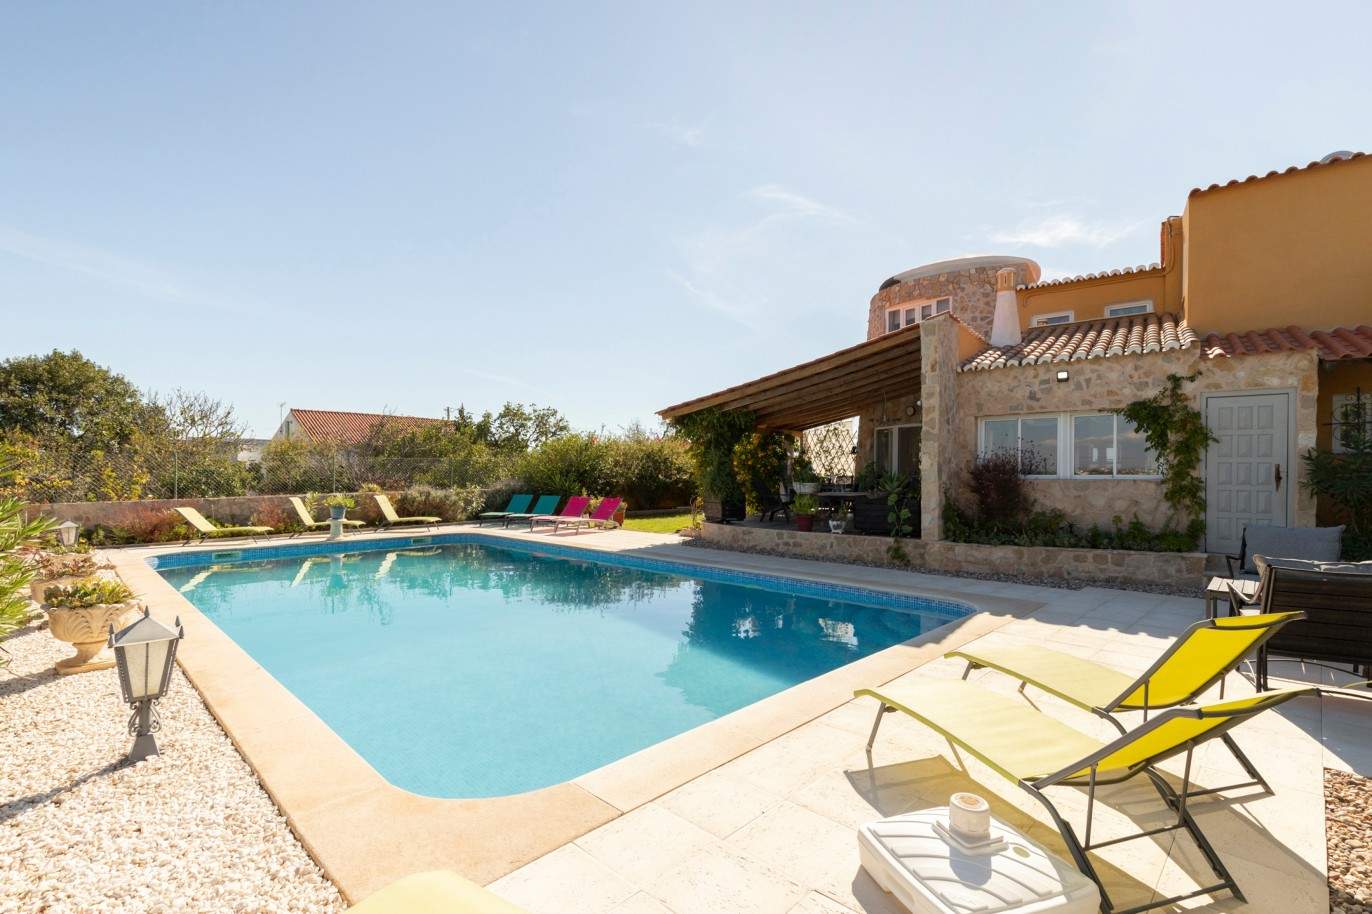 6 Bedrooms detached villa with swimming pool, for sale in Caramujeira, Algarve_209985